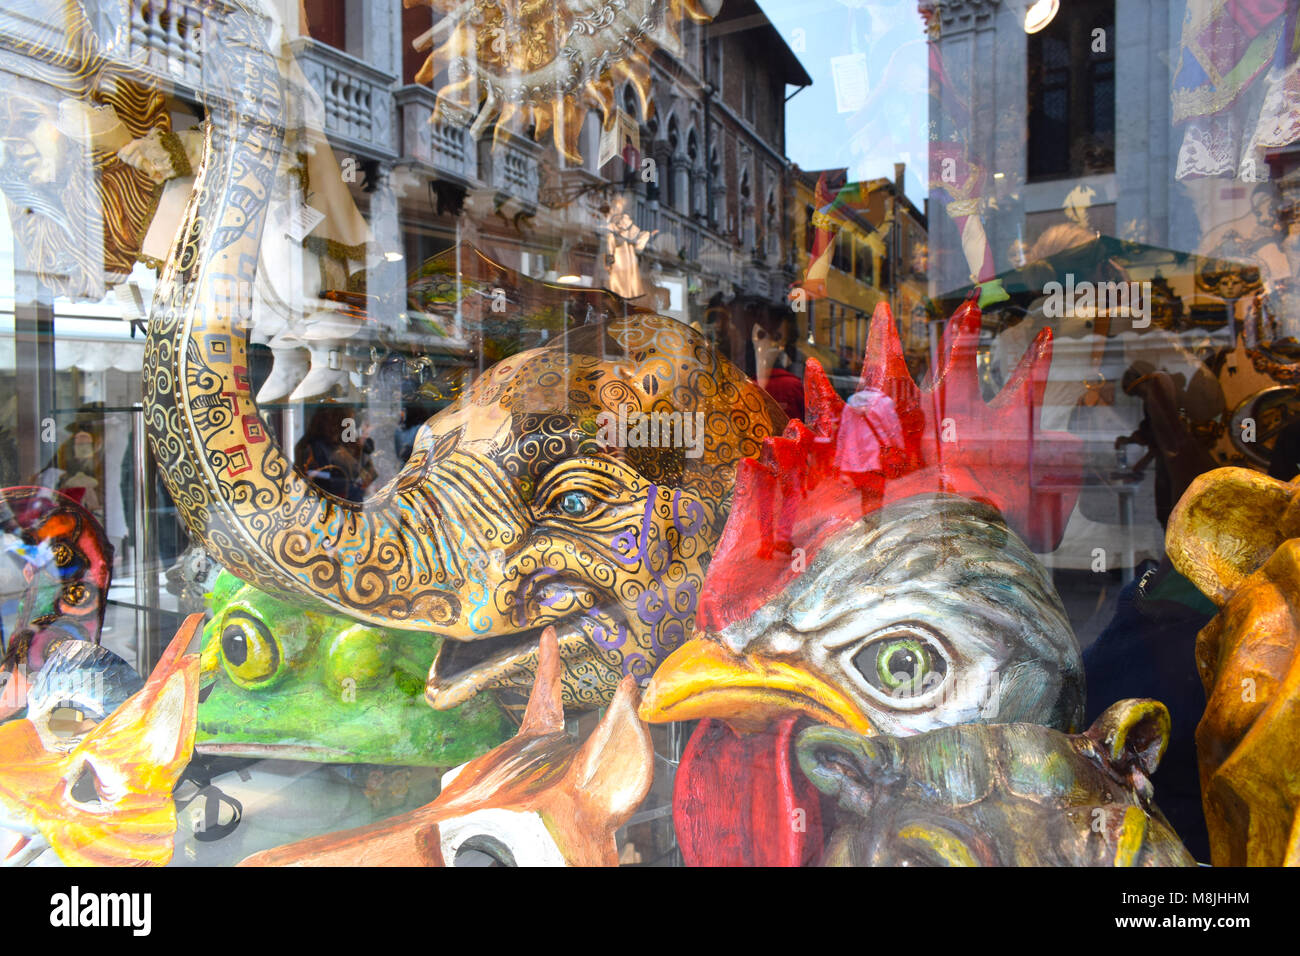 Masquerade Costume and Carnival Masks in shops and boutiques in Venice, Italy Stock Photo